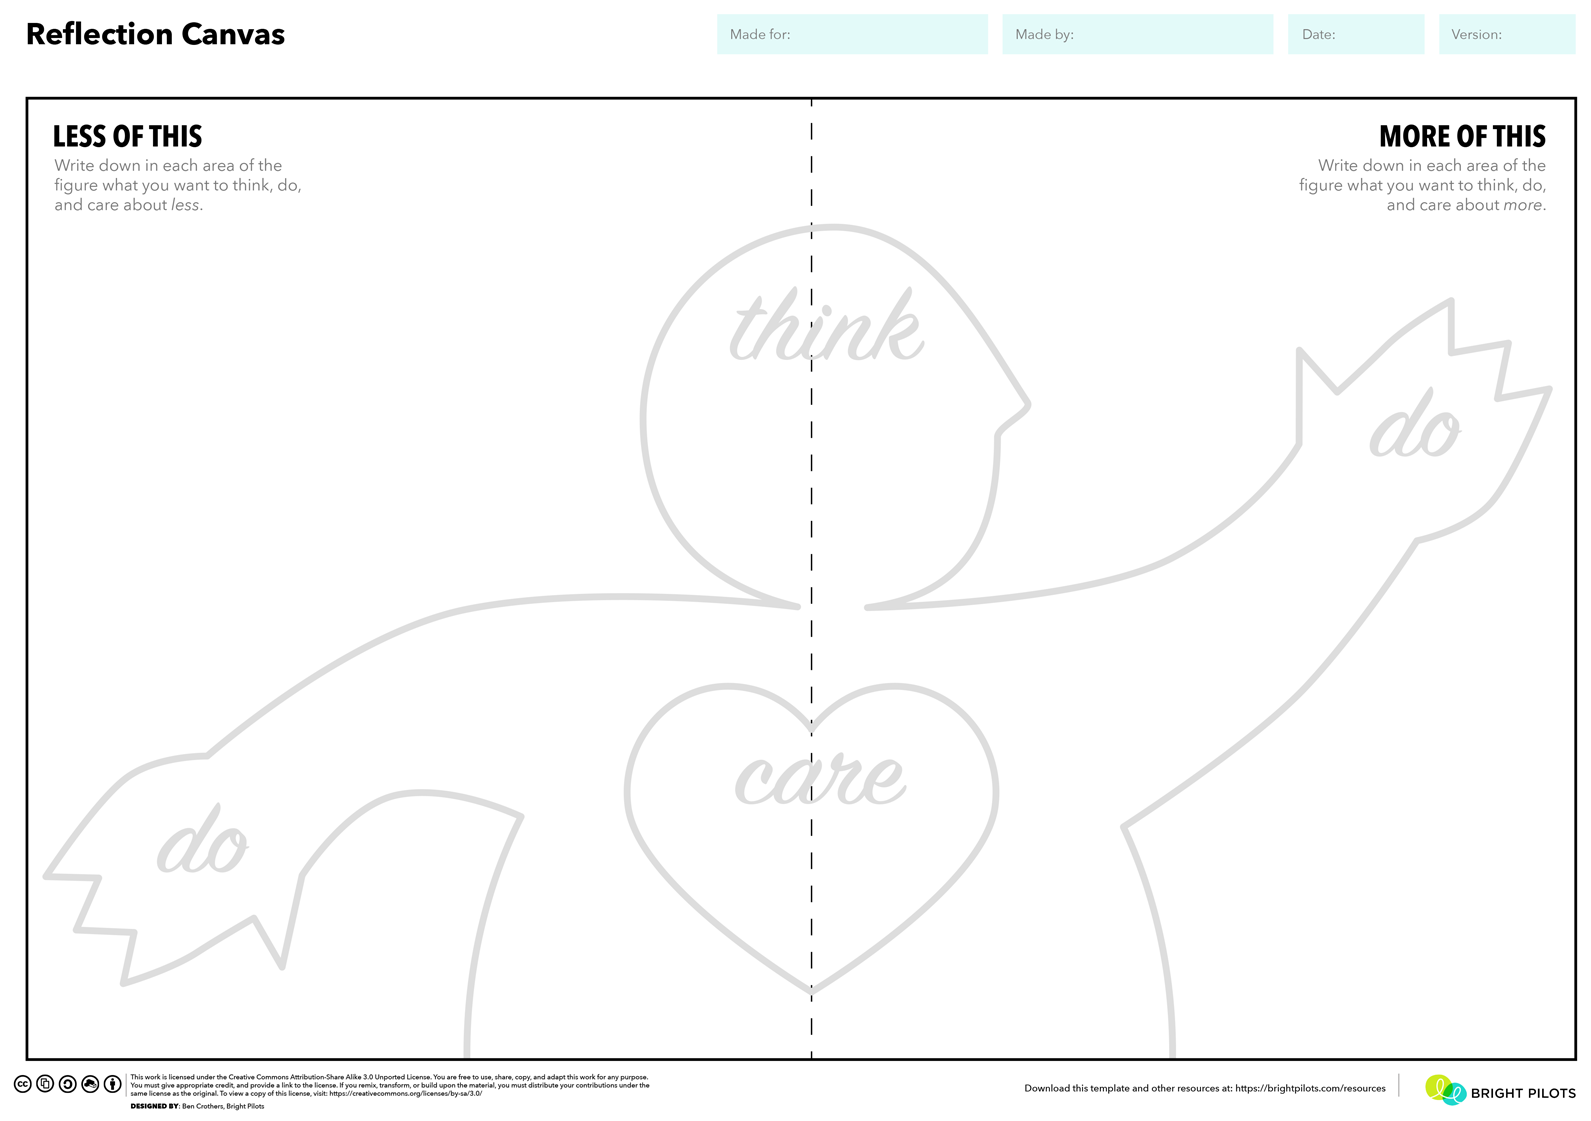 A picture of the Reflection Canvas, showing an outline of a figure with three places to capture your thoughts about what you want to think, do, and care about more, and what you want to think, do, and care about less, in the year ahead